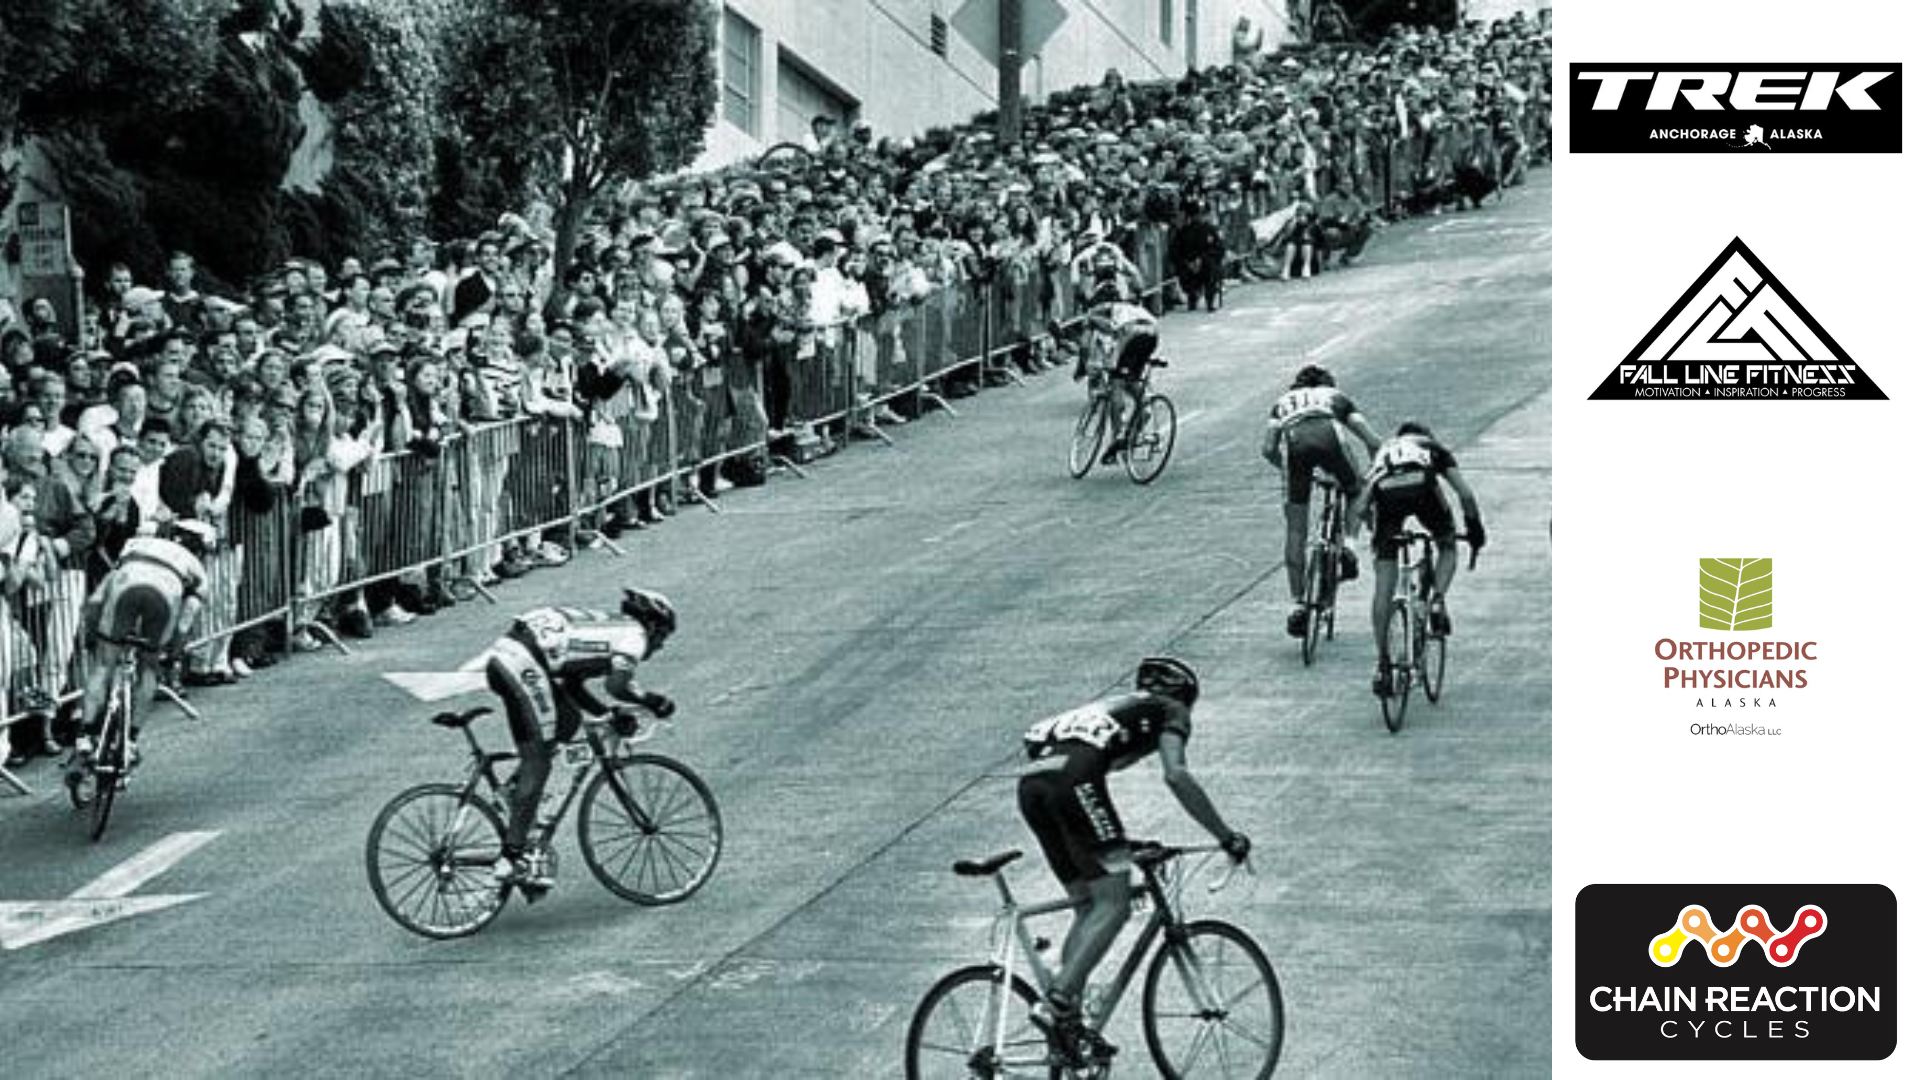 Potter Valley Hill Climb - Bicycle Race